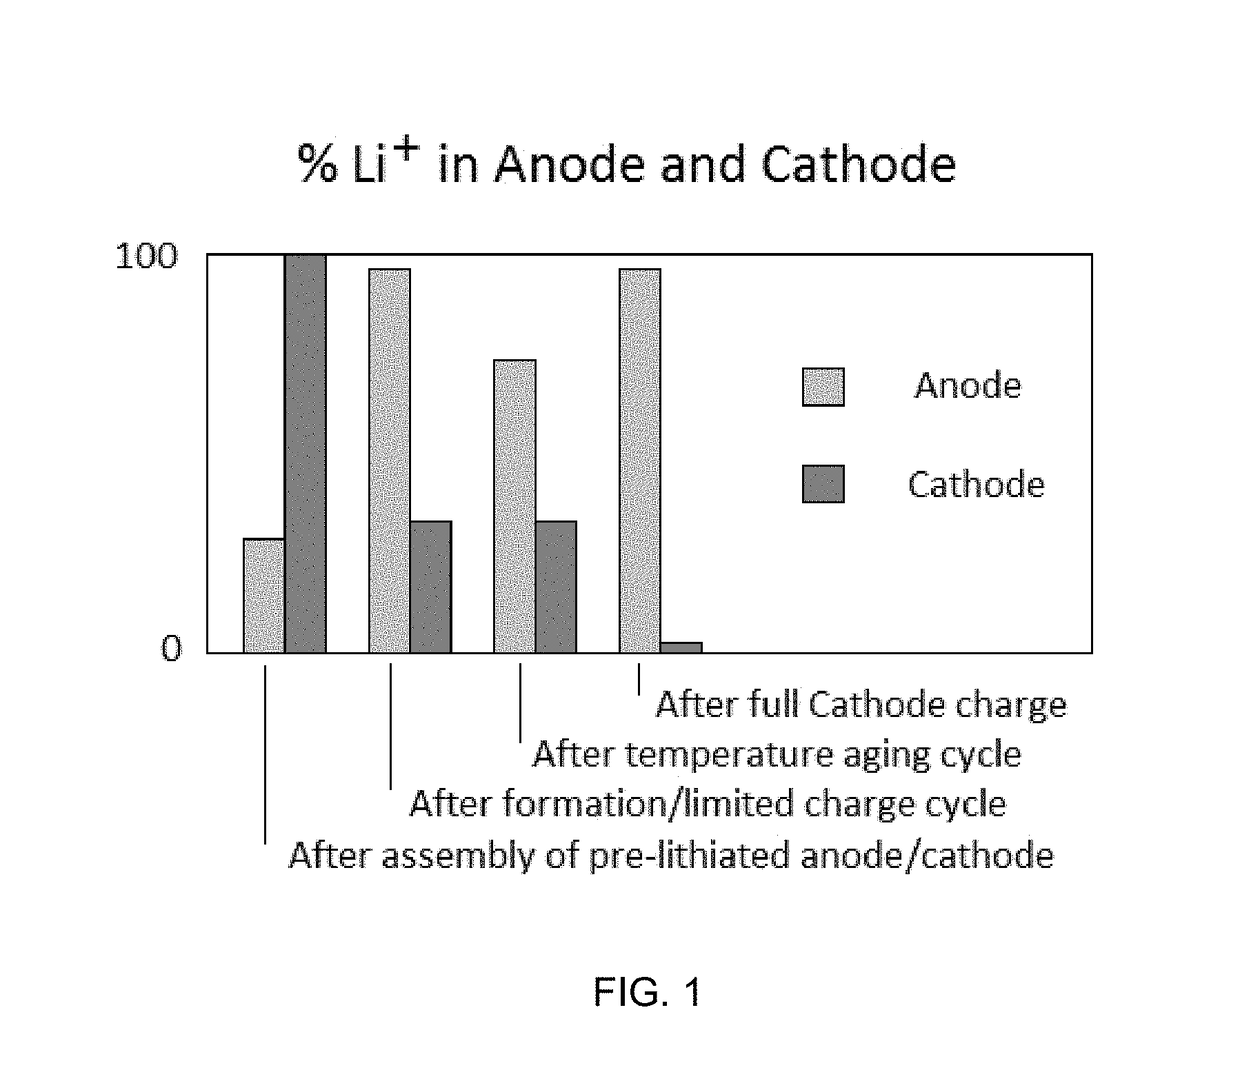 Phased introduction of lithium into the pre-lithiated anode of a lithium ion electrochemical cell